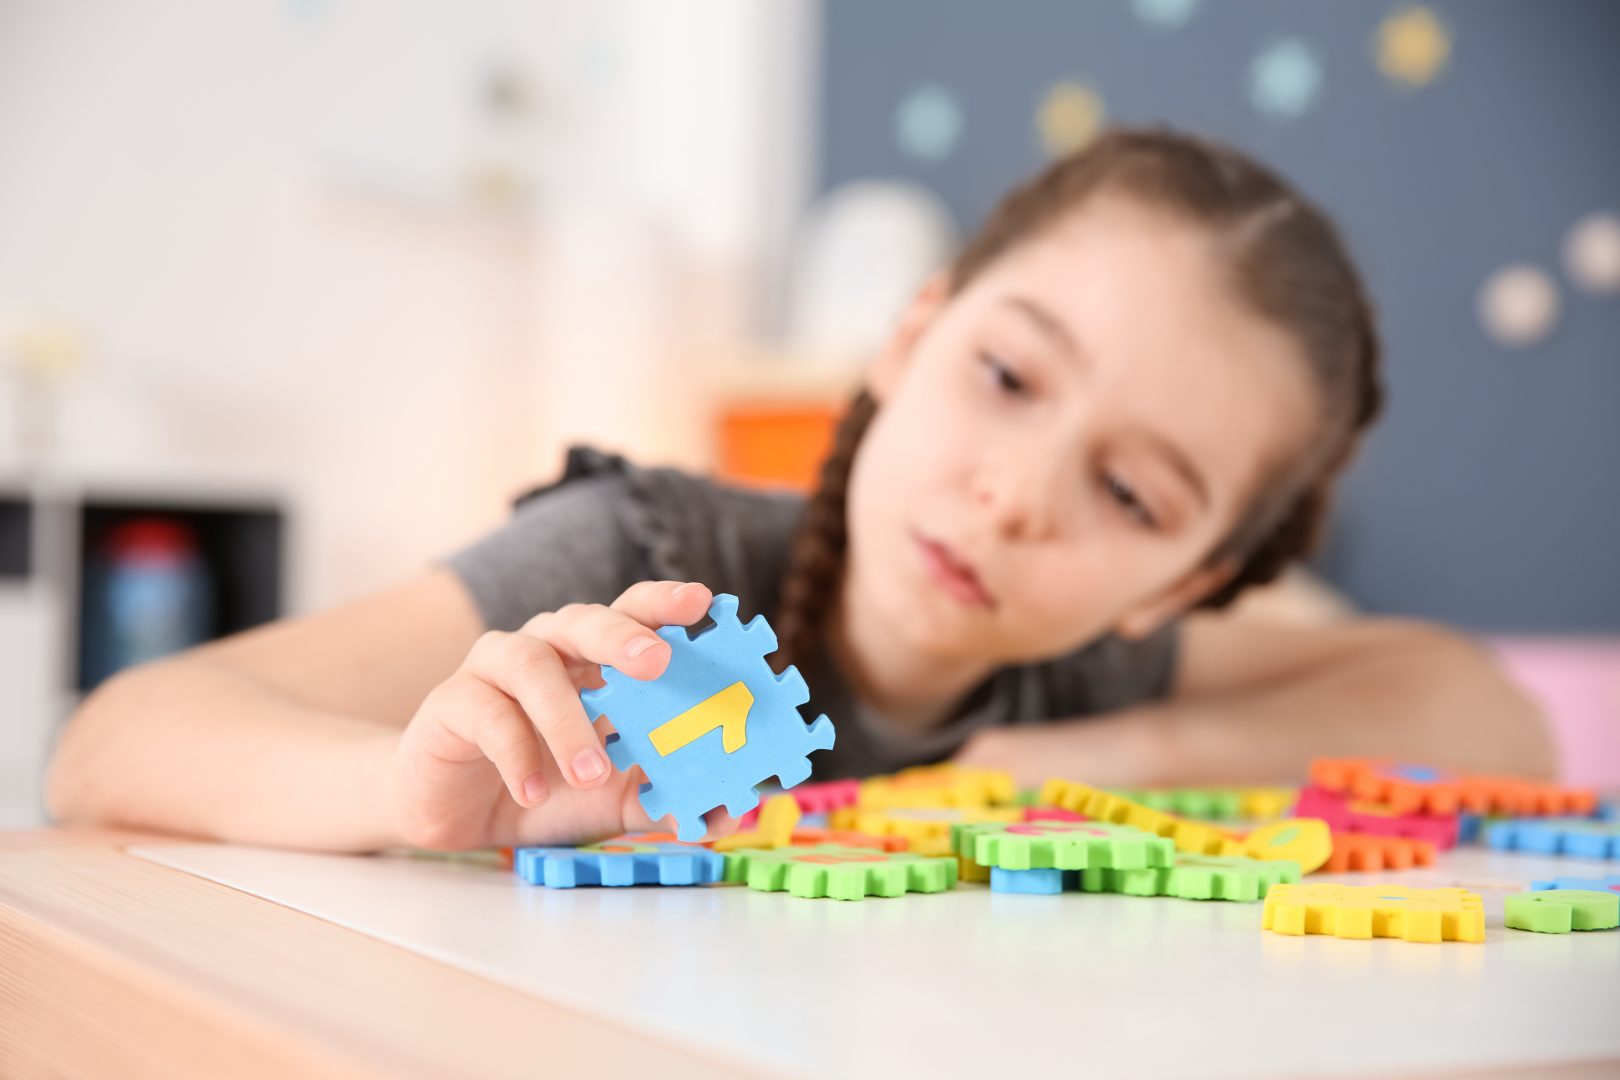 Little girl with autism disorder playing at home, closeup of puzzles